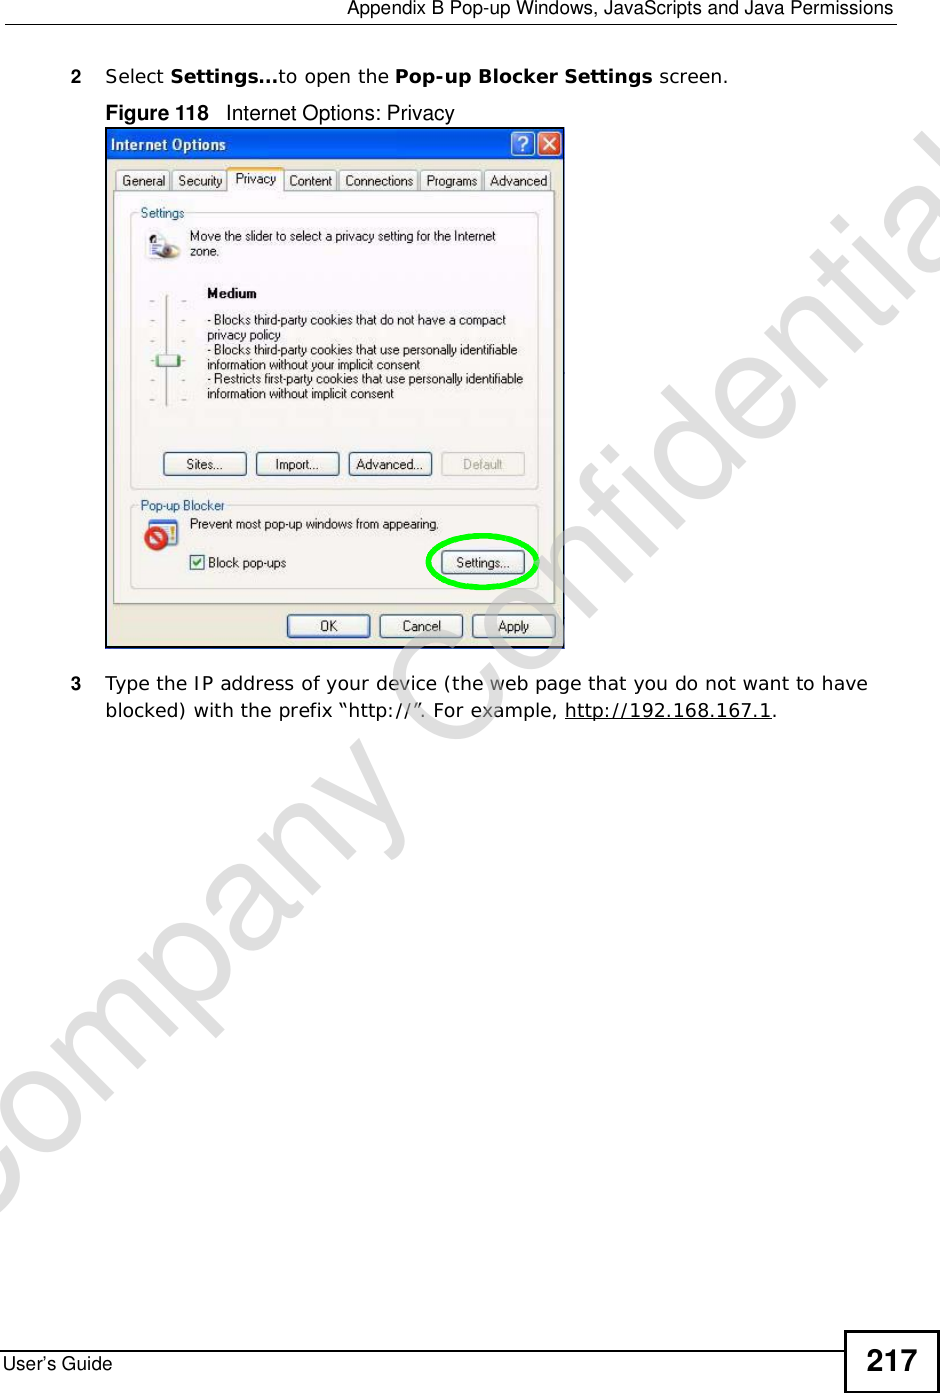  Appendix BPop-up Windows, JavaScripts and Java PermissionsUser’s Guide 2172Select Settings…to open the Pop-up Blocker Settings screen.Figure 118   Internet Options: Privacy3Type the IP address of your device (the web page that you do not want to have blocked) with the prefix “http://”. For example, http://192.168.167.1. Company Confidential